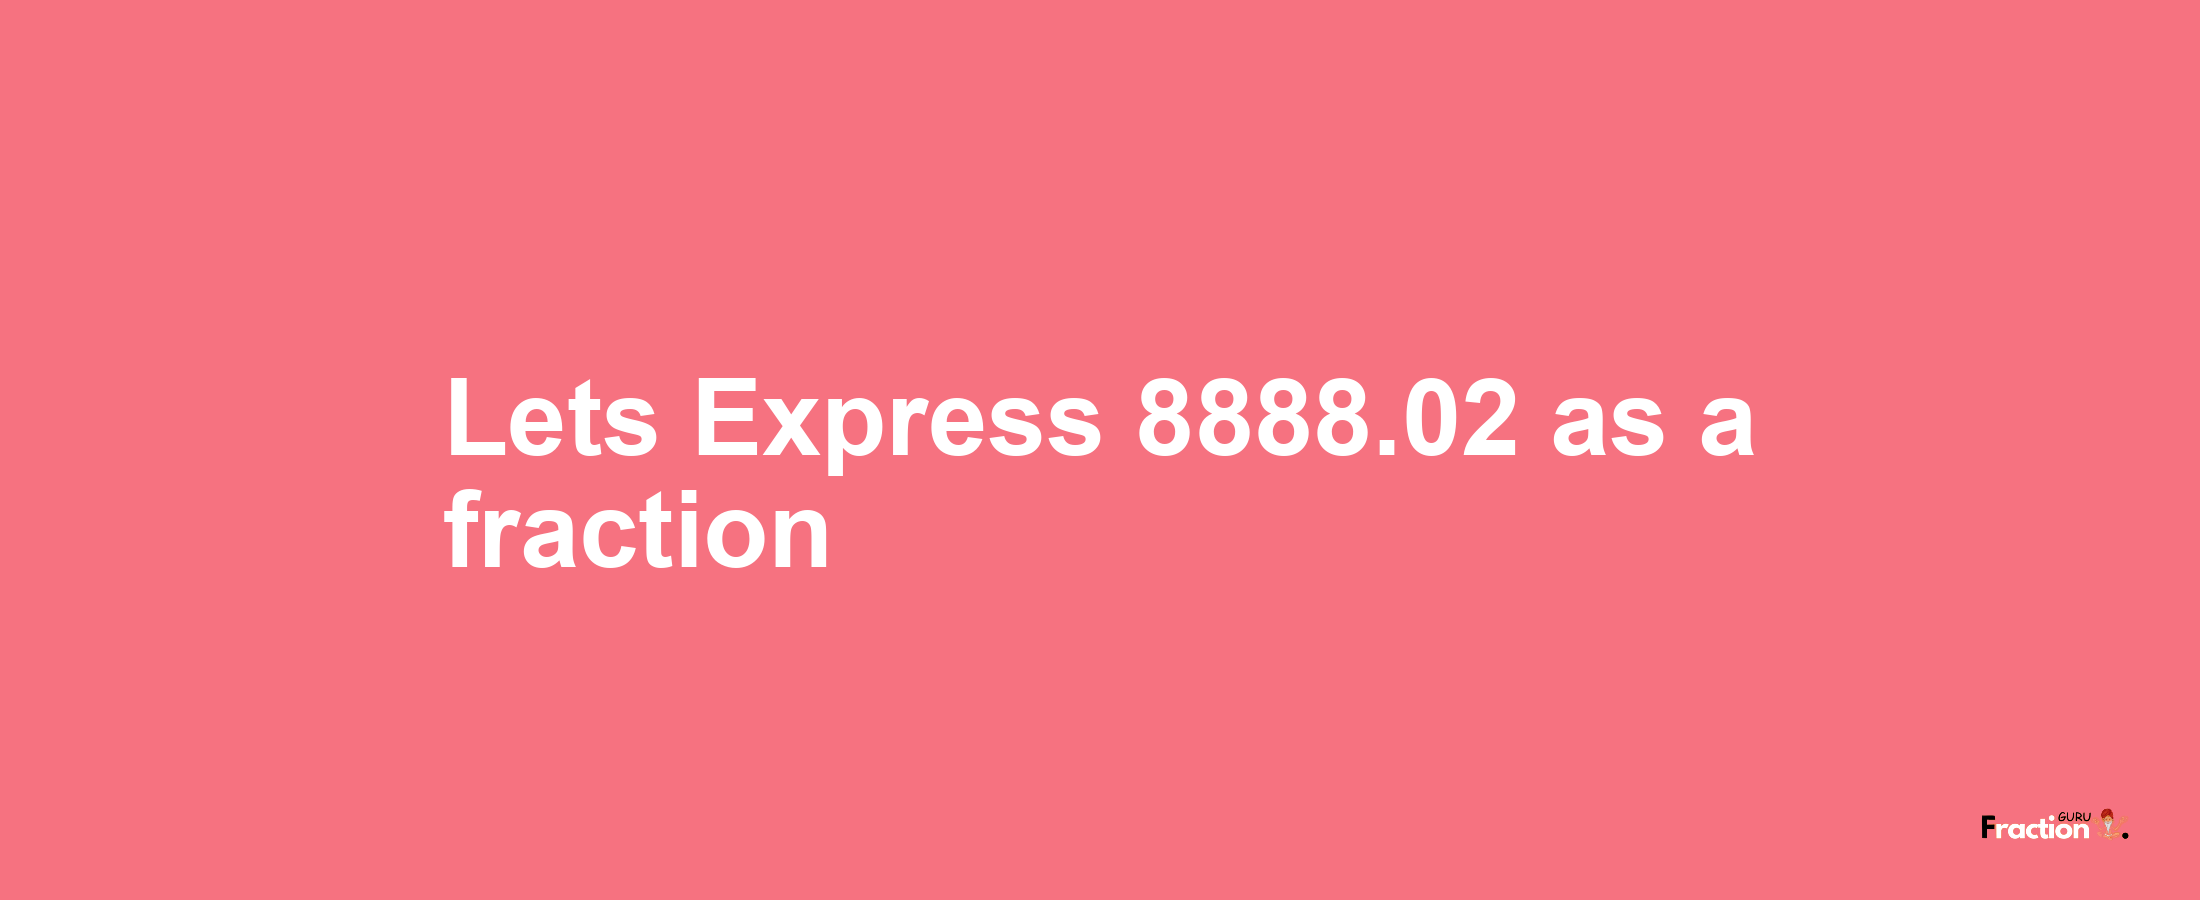 Lets Express 8888.02 as afraction